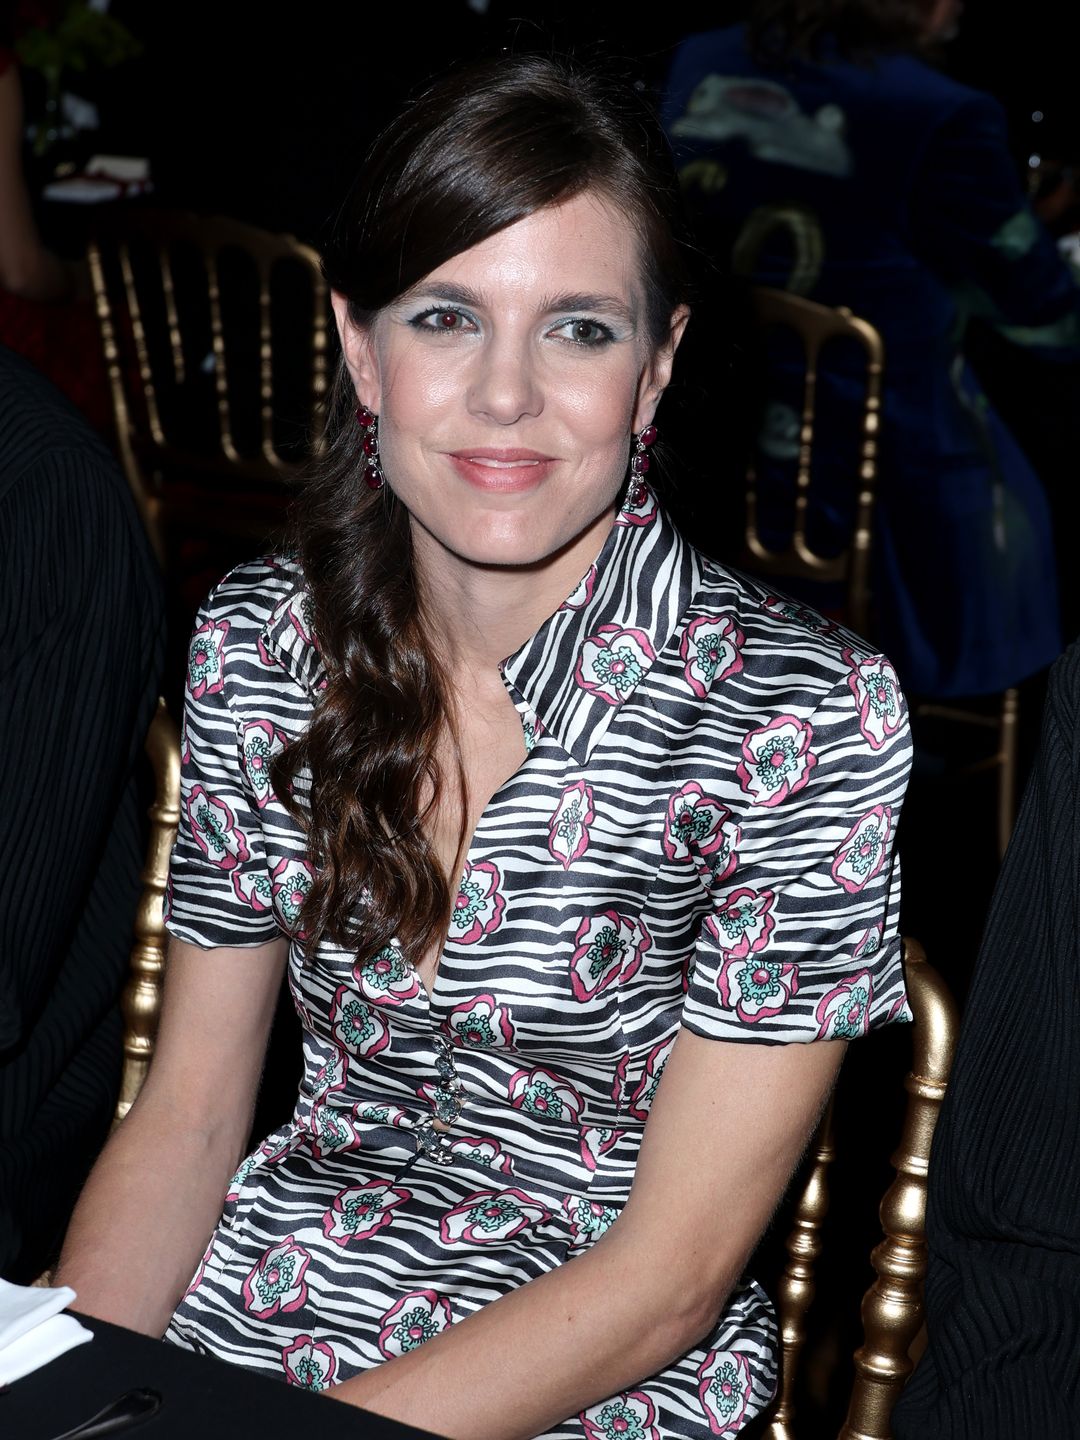 MONACO, MONACO - OCTOBER 14: (EDITOR'S NOTE : NO TABLOIDS WEB & PRINT, NO DAILY MAIL, NO DAILY MAIL GROUP, NO VOICI, NO CLOSER) Charlotte Casiraghi attends the 60th AMADE Anniversary Dinner at Monte Carlo Opera Garnier on October 14, 2023 in Monaco, Monaco. (Photo by Pascal Le Segretain/Getty Images)